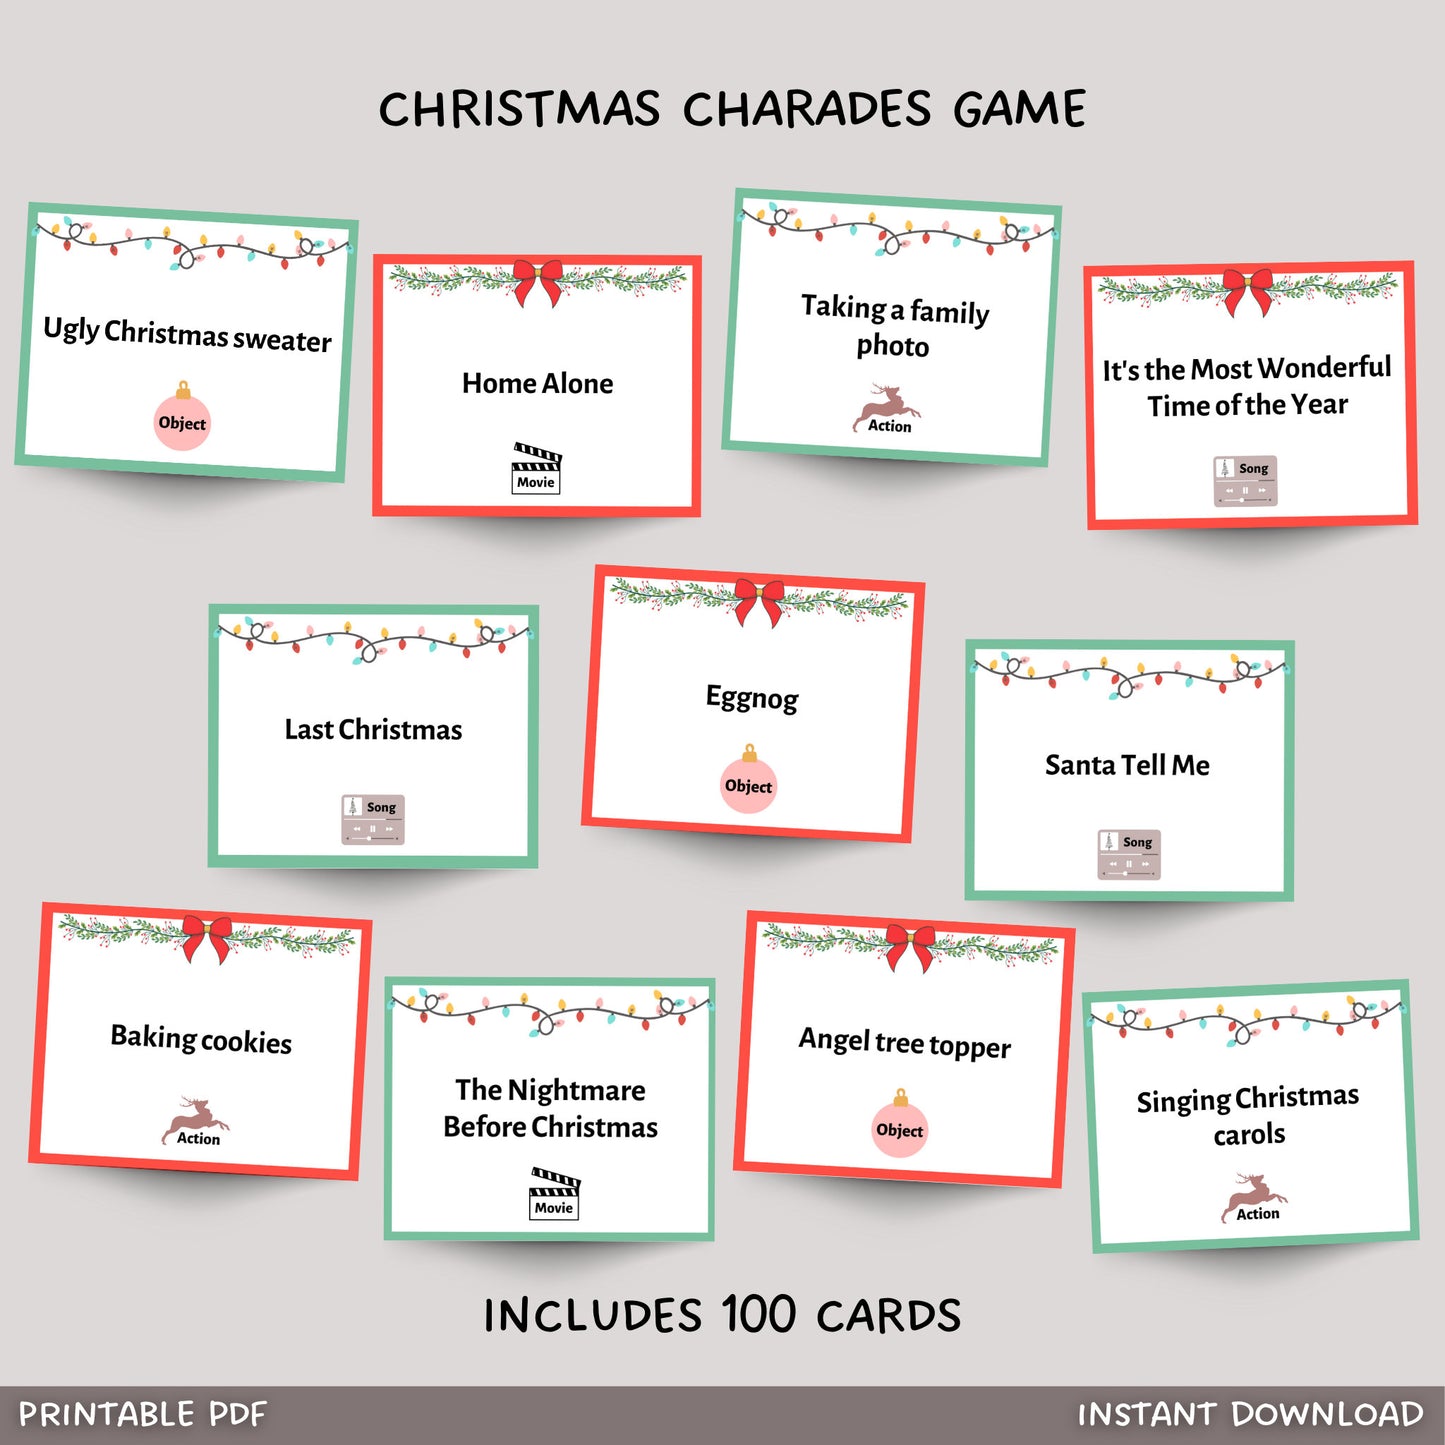 Get into the holiday spirit with our printable Christmas charades game. Perfect for adults and kids and includes 100 cards that contain different Christmas songs, movies, actions and objects. Act out whats on the card and let your team members guess.